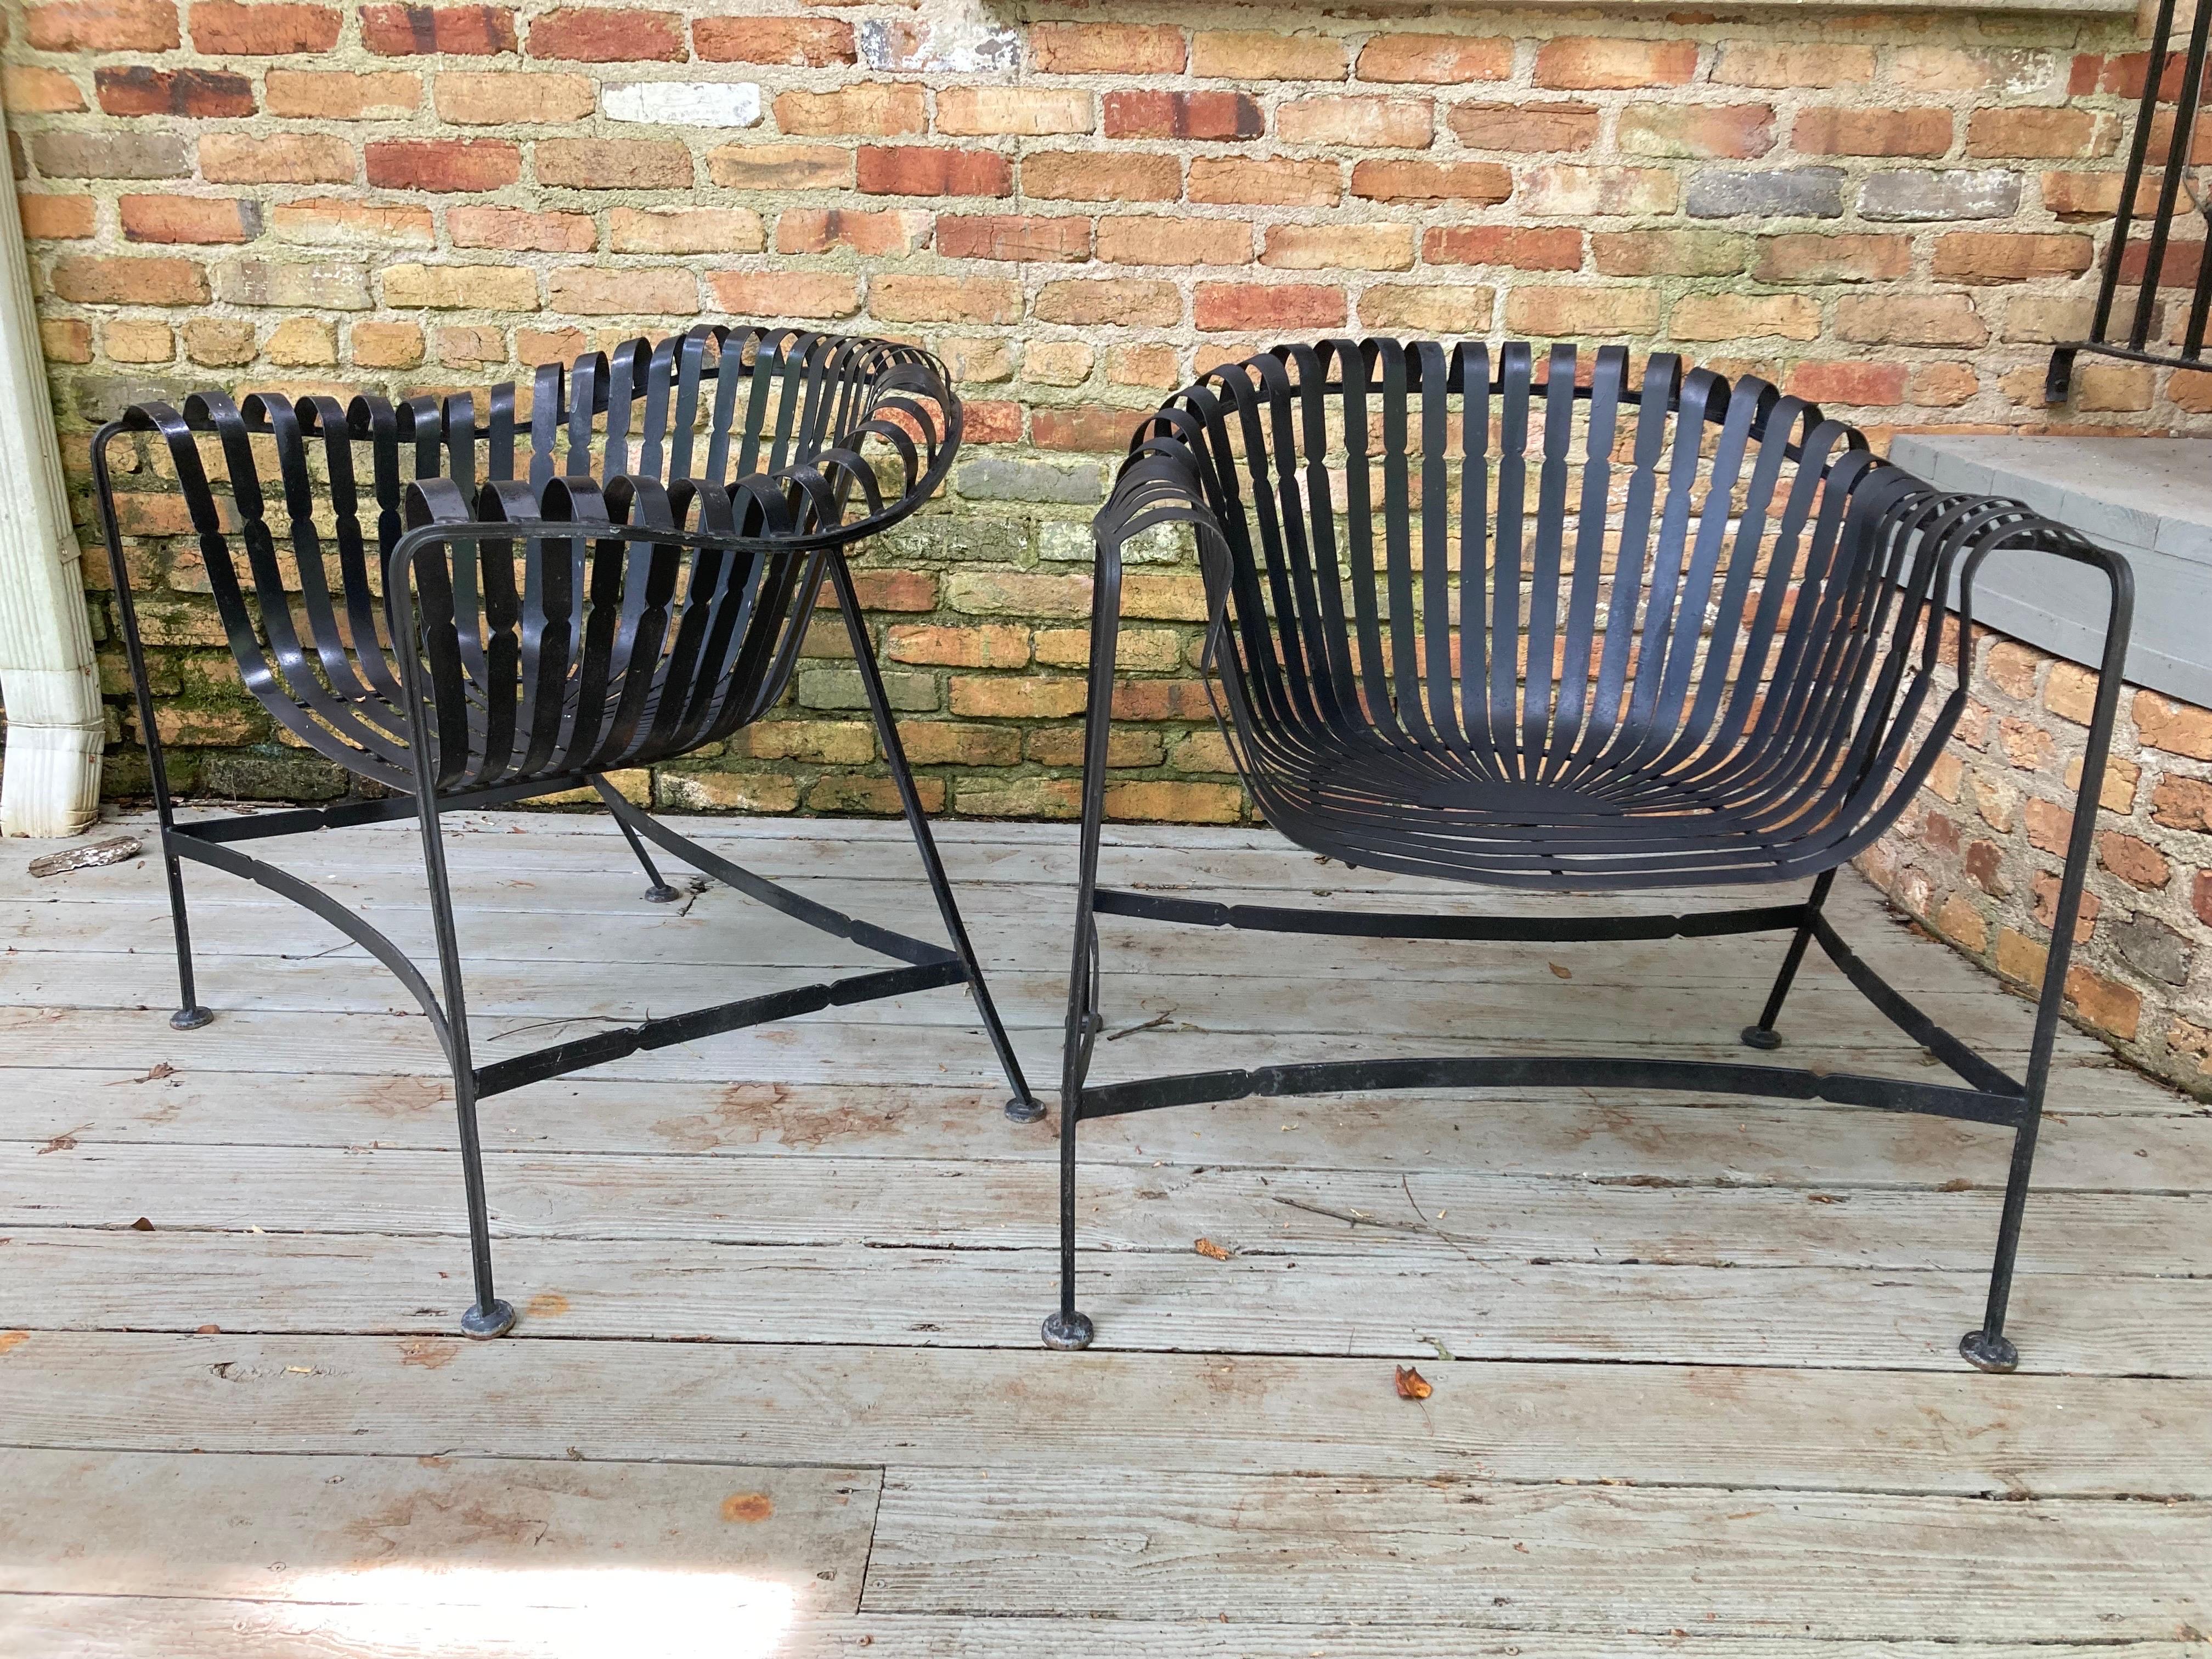 indoor or outdoor industrial chic duo, 28 wide and 28 tall, 24 deep, seat to floor 15.5. no makers mark, recently sanded and painted 
shipping from athens, ga 
sold as a pair
